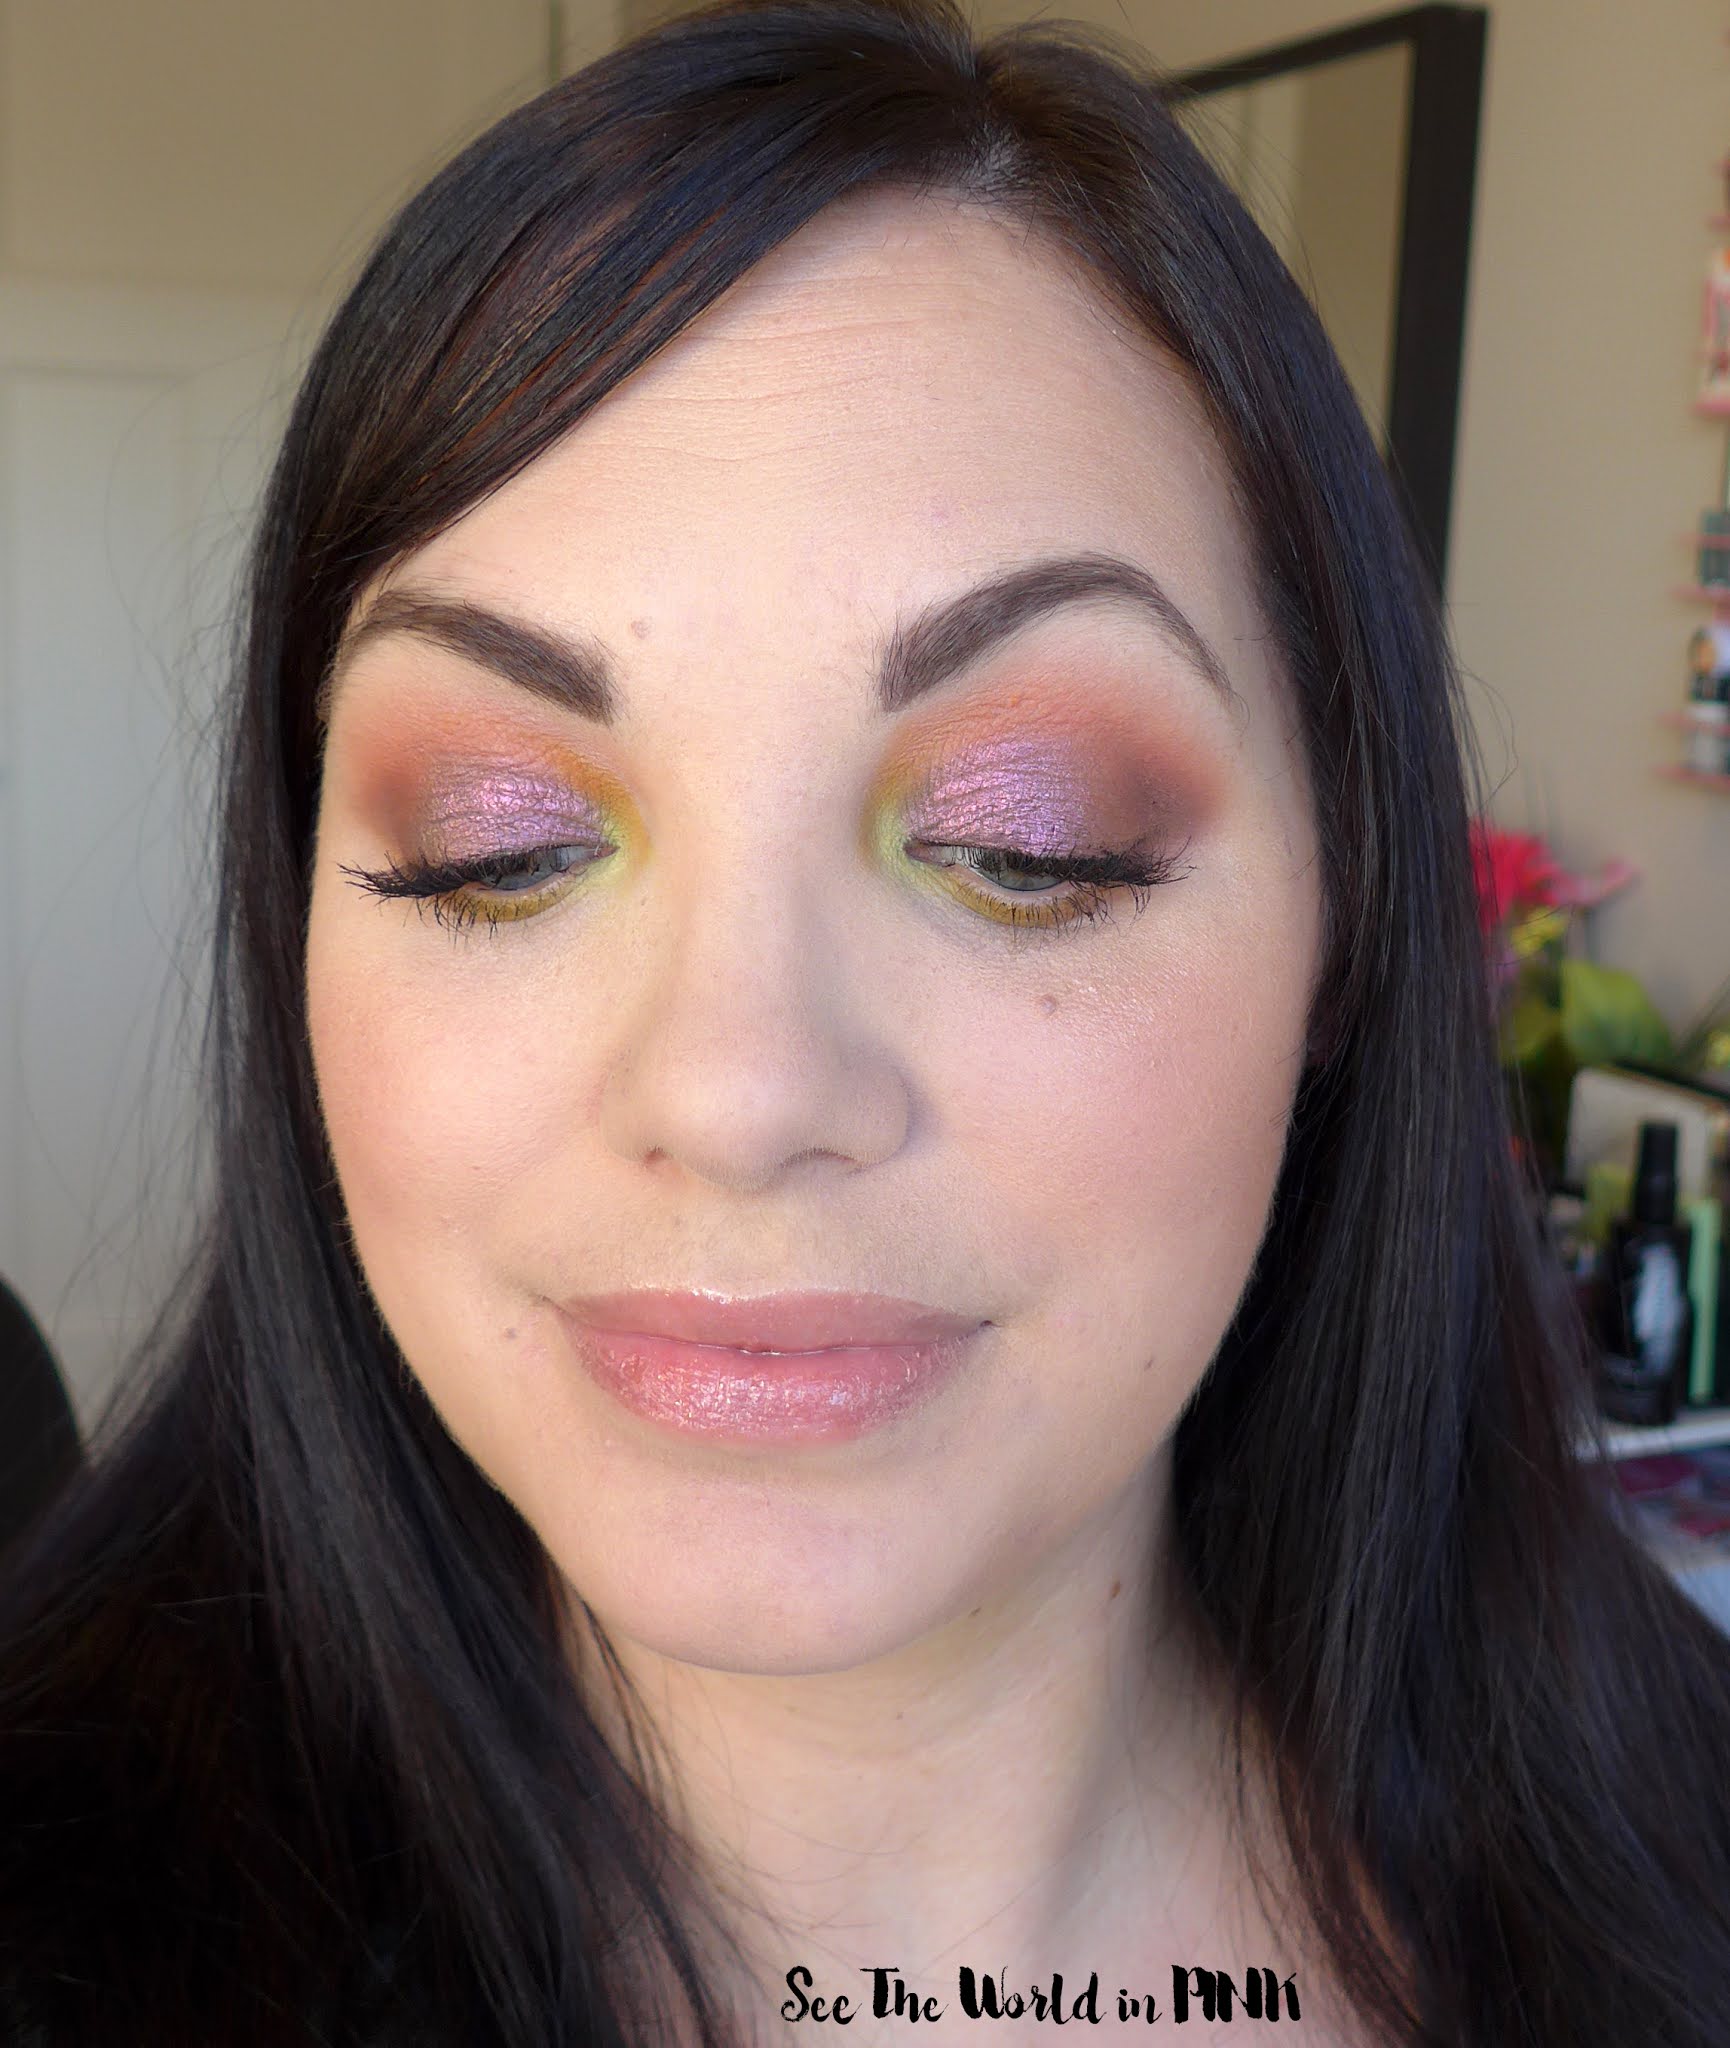 Natasha Denona Trichrome Eyeshadow Palette - 3 Makeup Looks, Swatches and Thoughts!